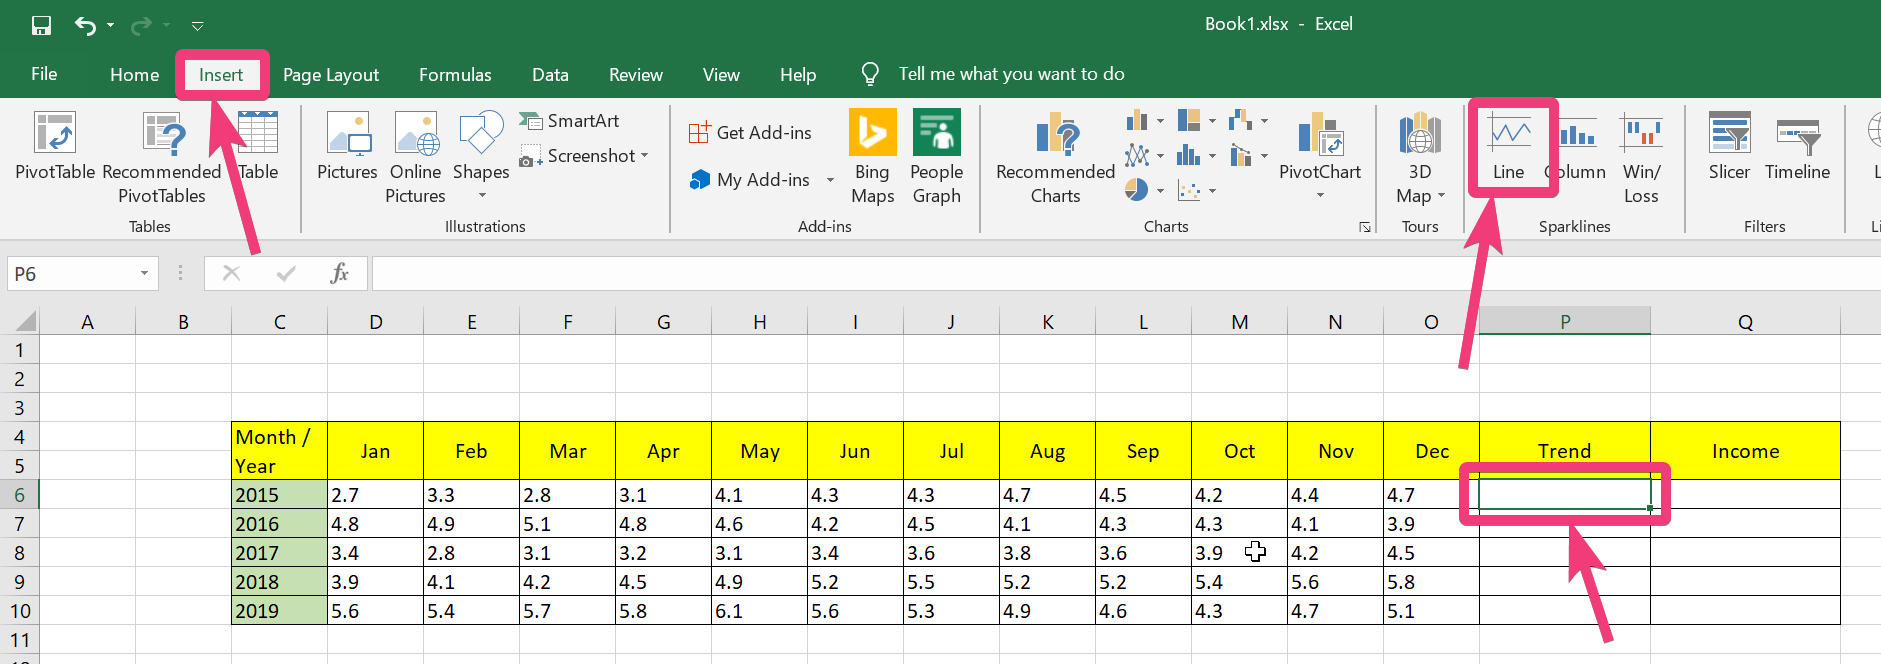 Sparklines on Excel and Sheets 20